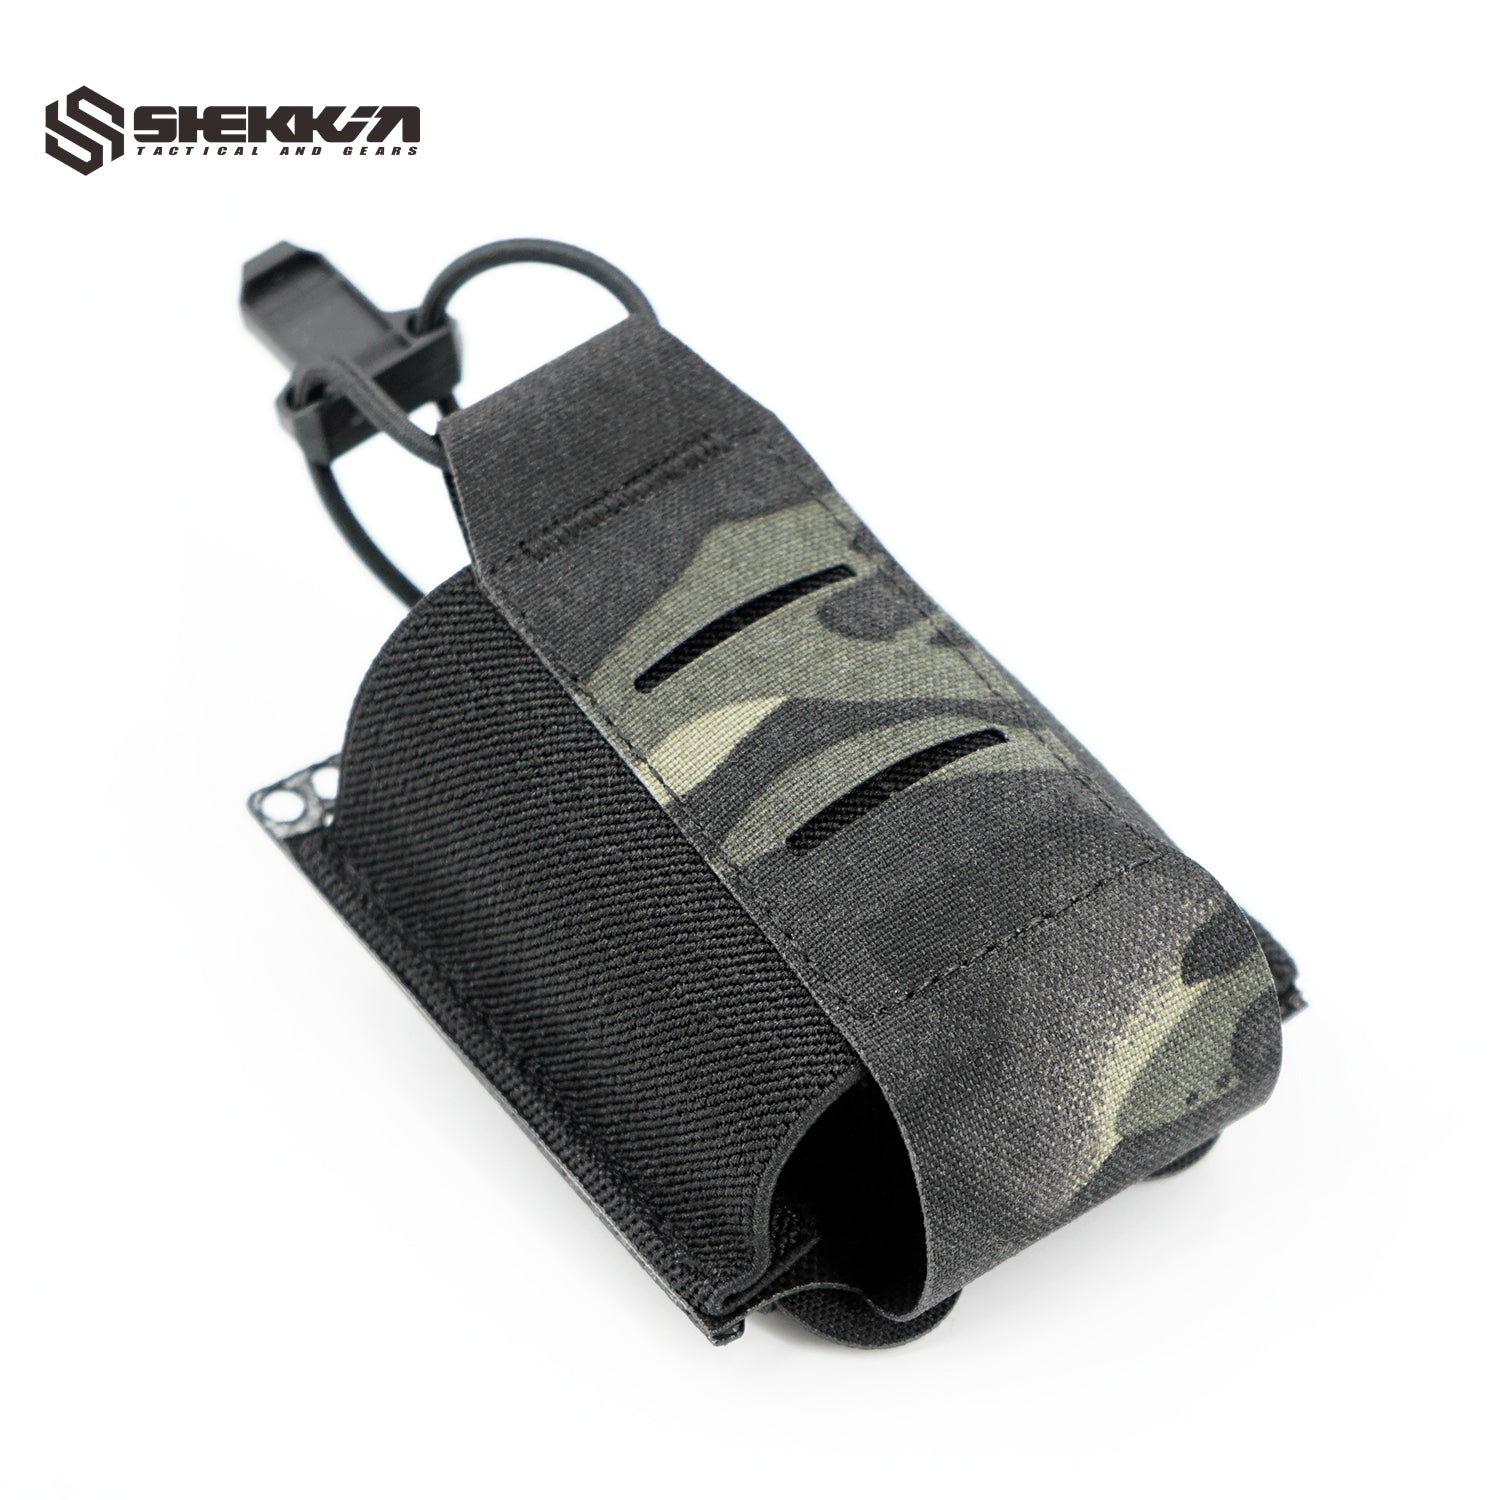 Single 556 m4 mag pouch with Tegris plate - Shekkin Gears